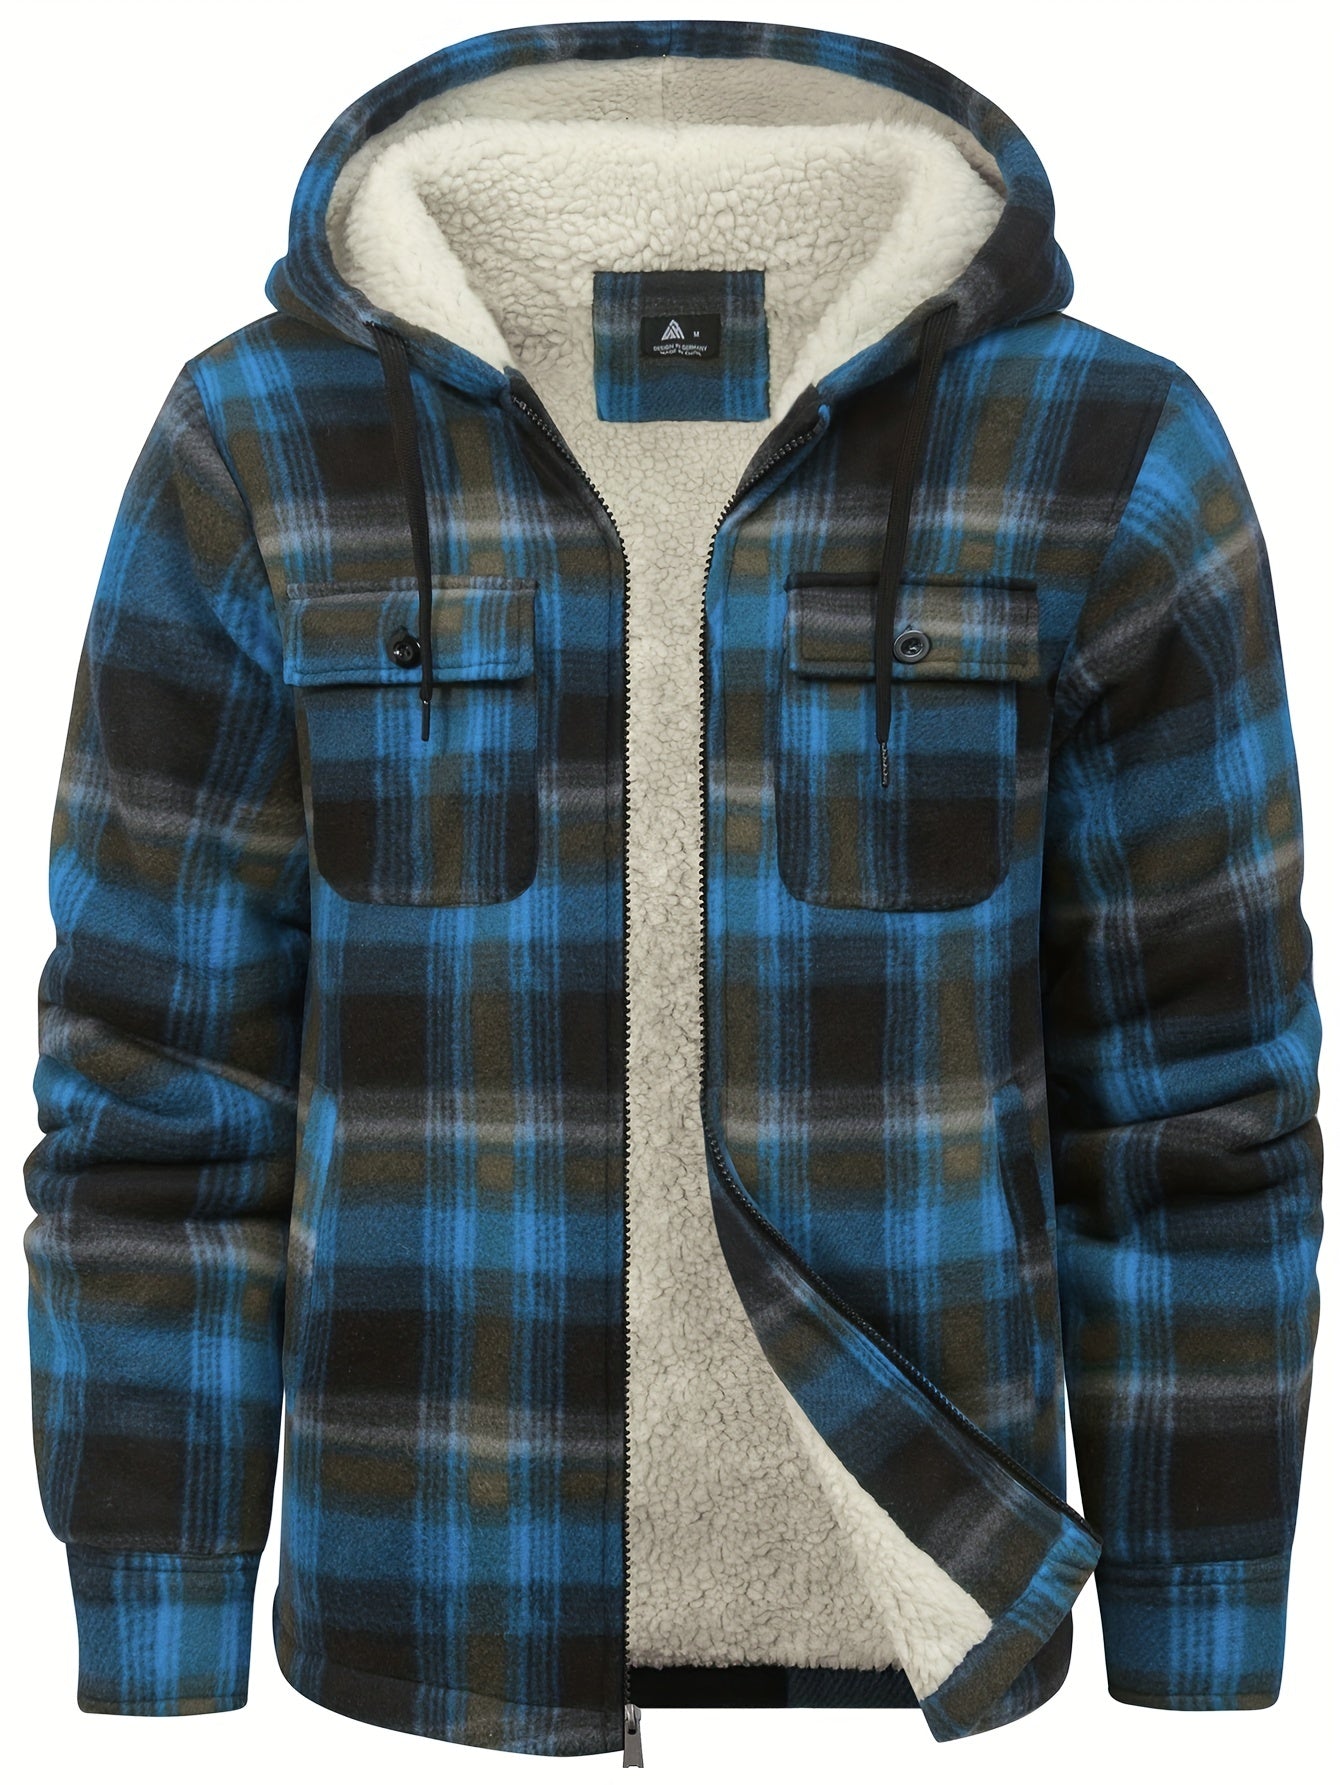 Casual Plaid Pattern Men's Zip Up Fleece Hooded Jacket with Pocket Design, Fall Winter Outdoor Sea Blue / XL(42)